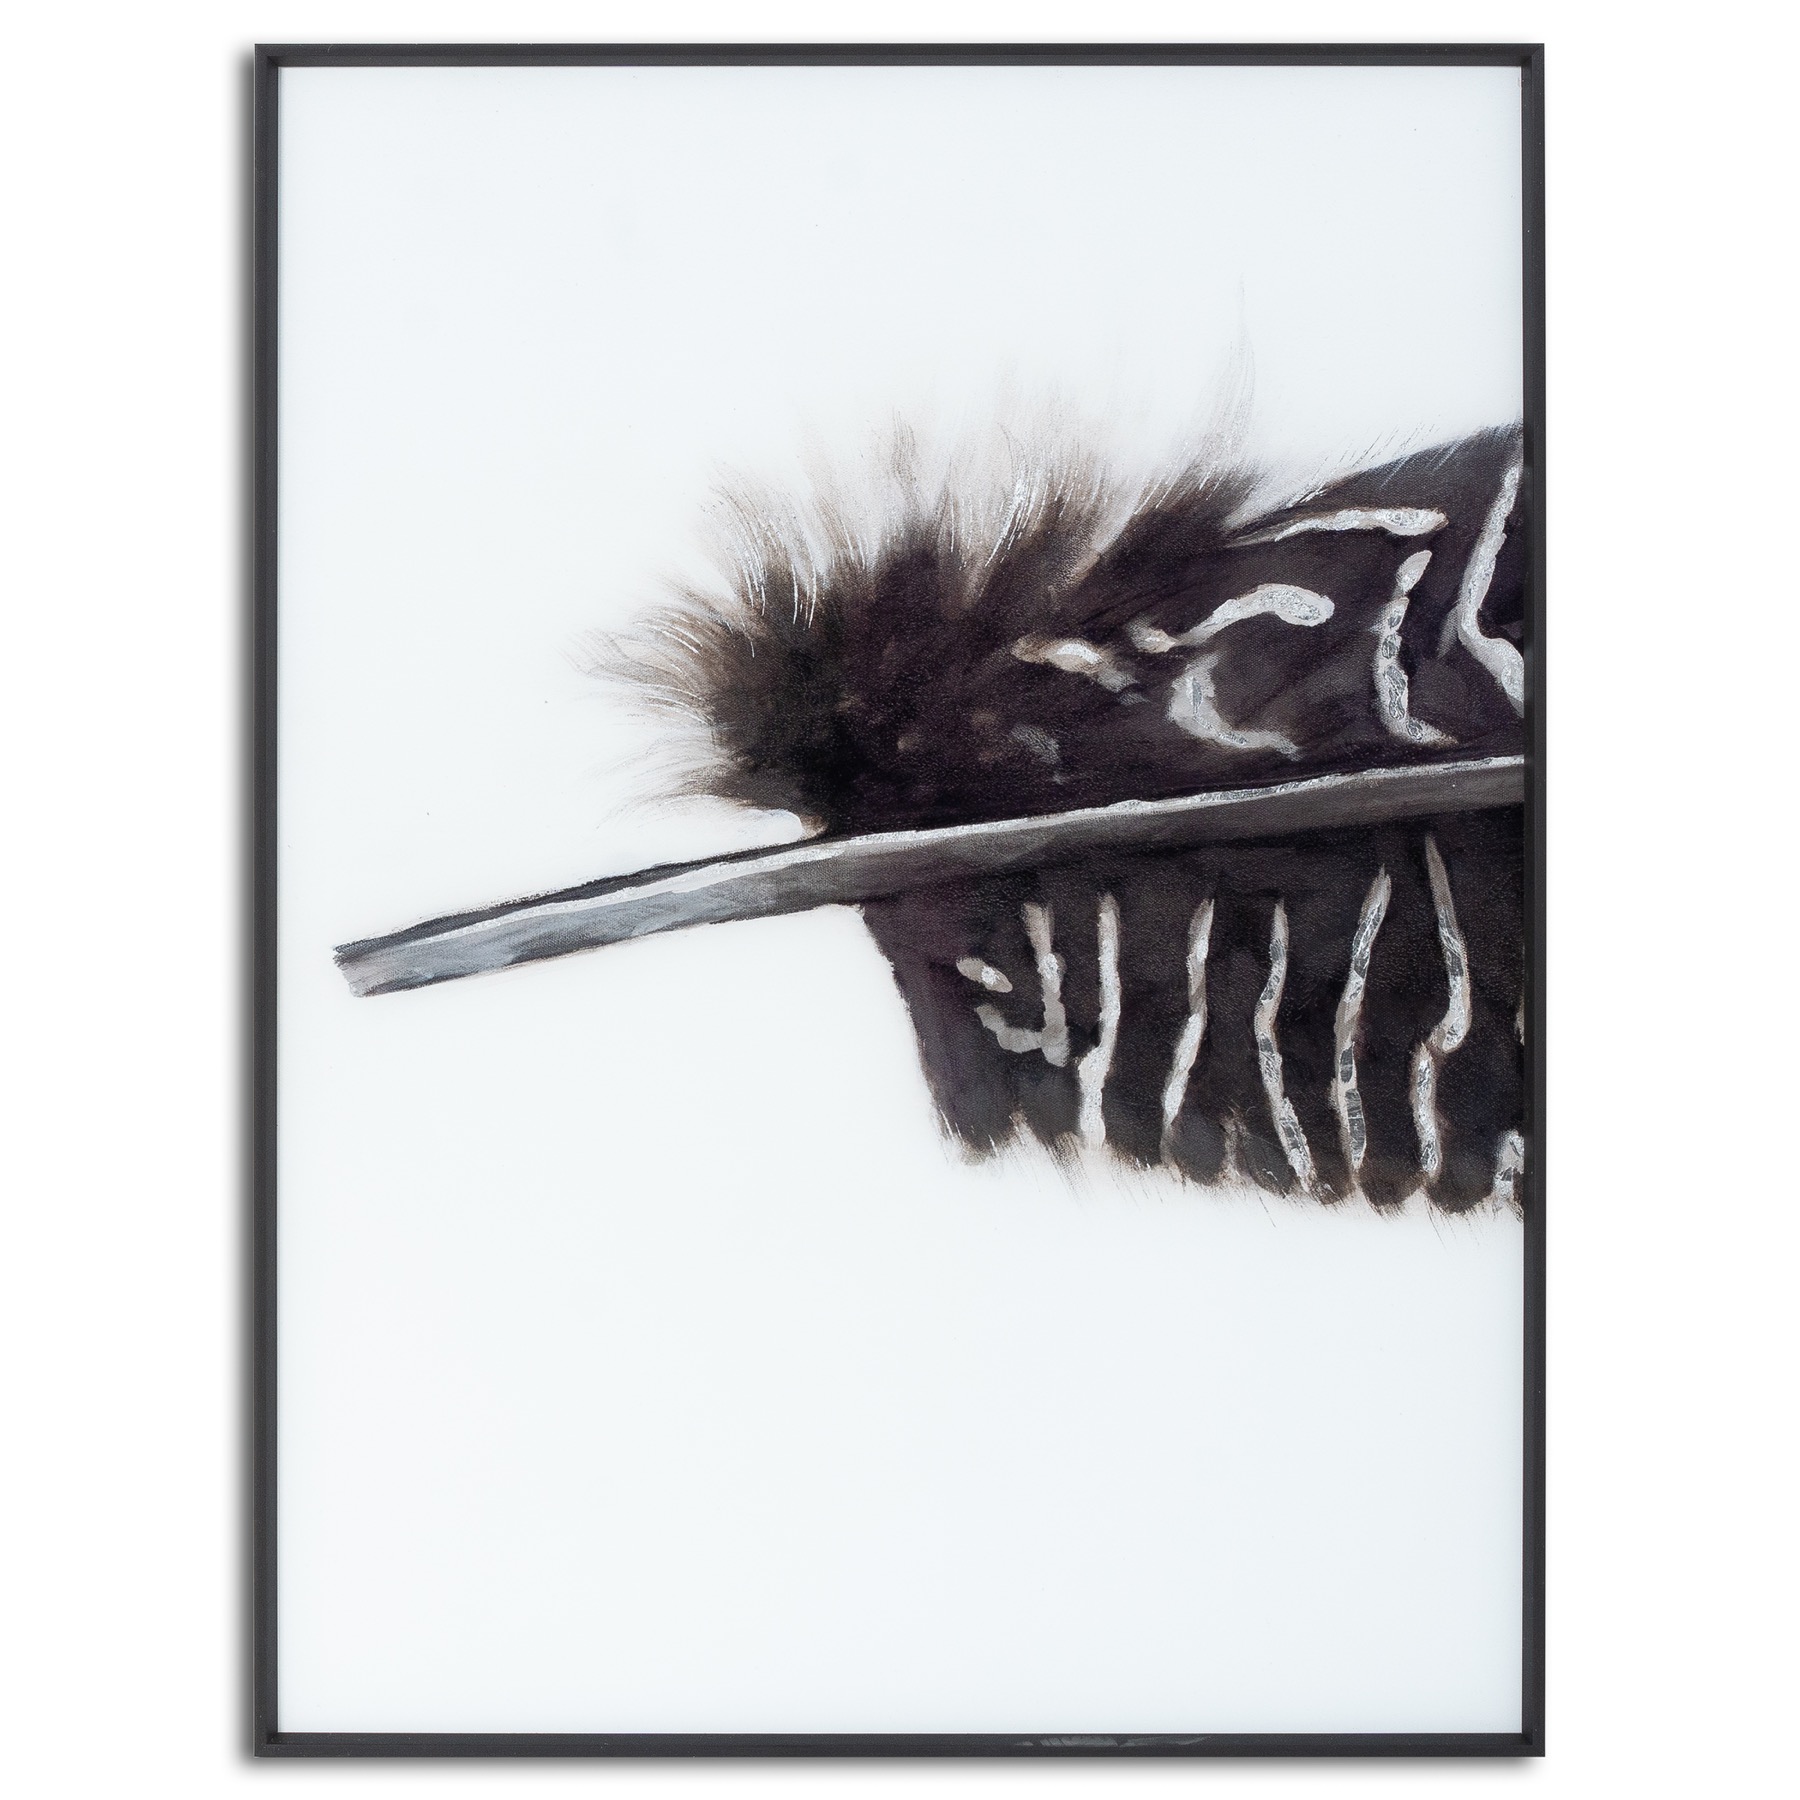 Black Feather With White Spots Over 3 Black Glass Frames - Image 2